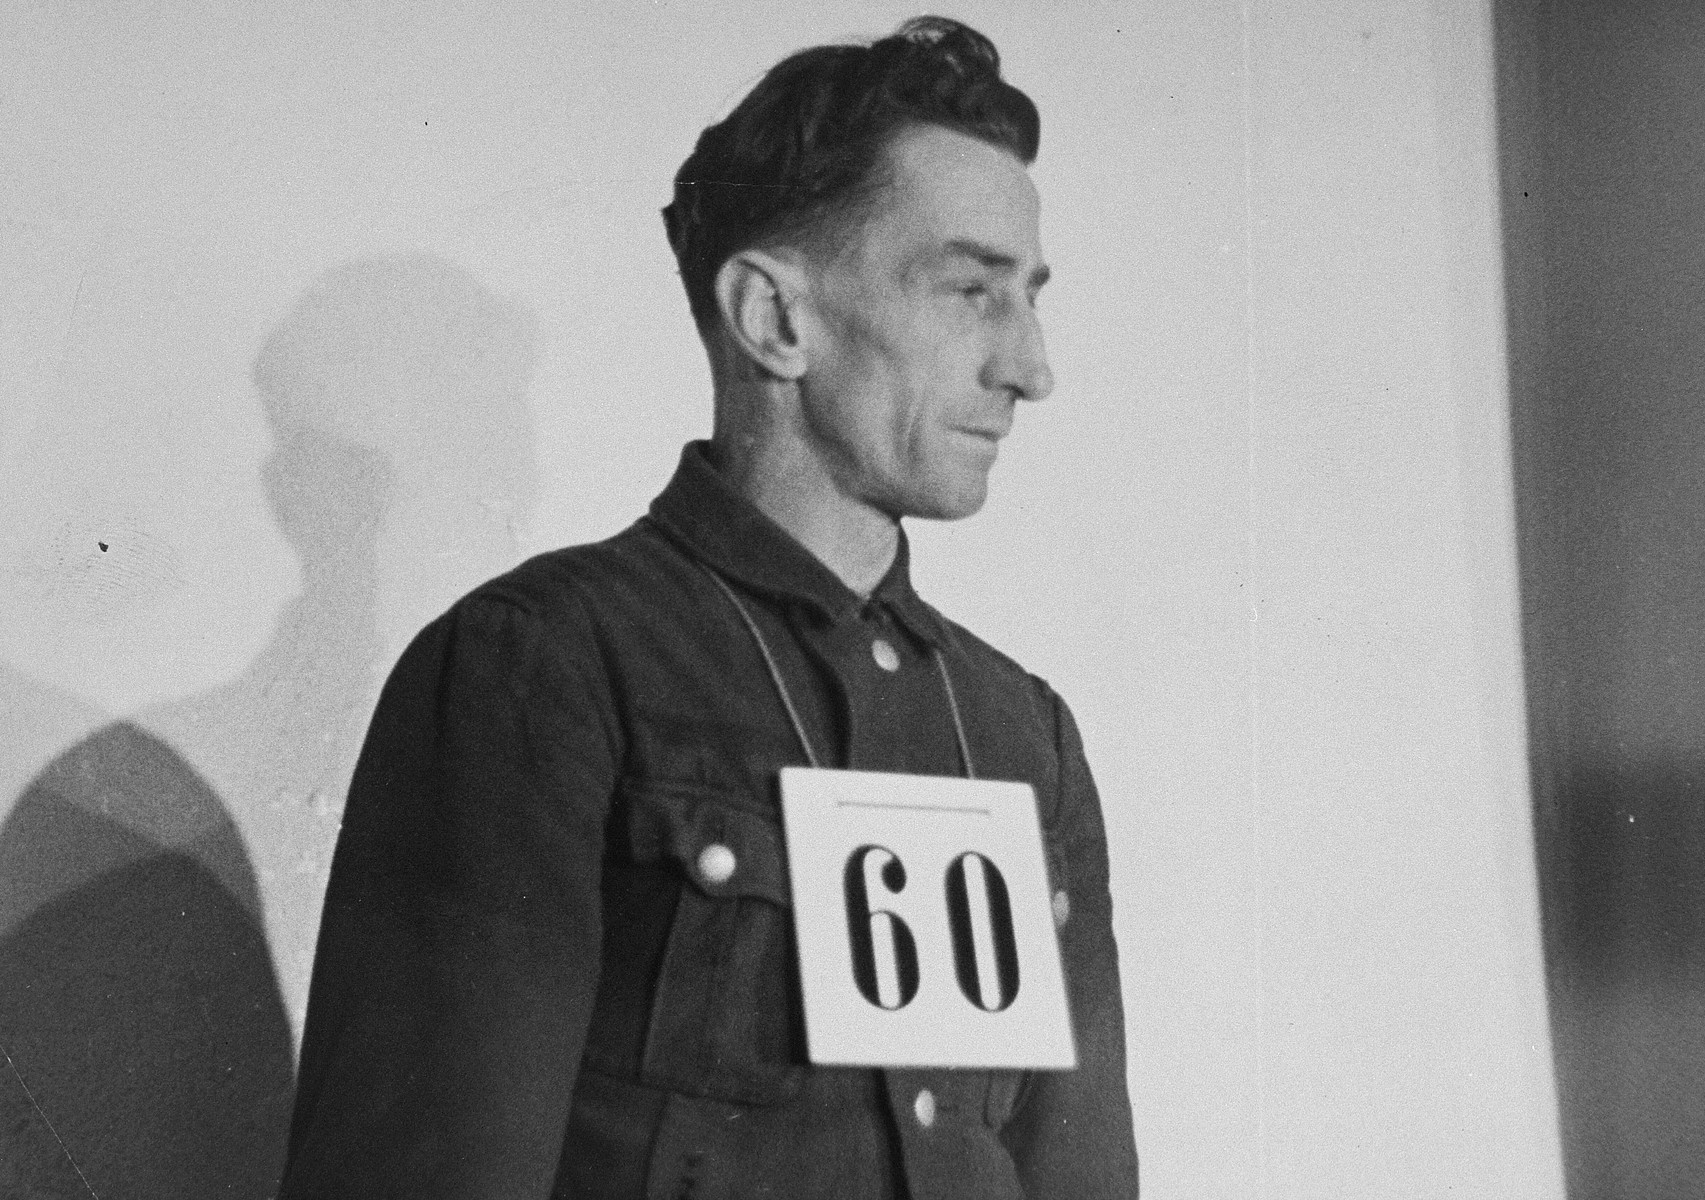 Portrait of former SS-Hauptscharfuehrer Hans Spatzenegger, a defendant at the trial of 61 former camp personnel and prisoners from Mauthausen.  

Spatzenegger was convicted and sentenced to death on May 13, 1946.